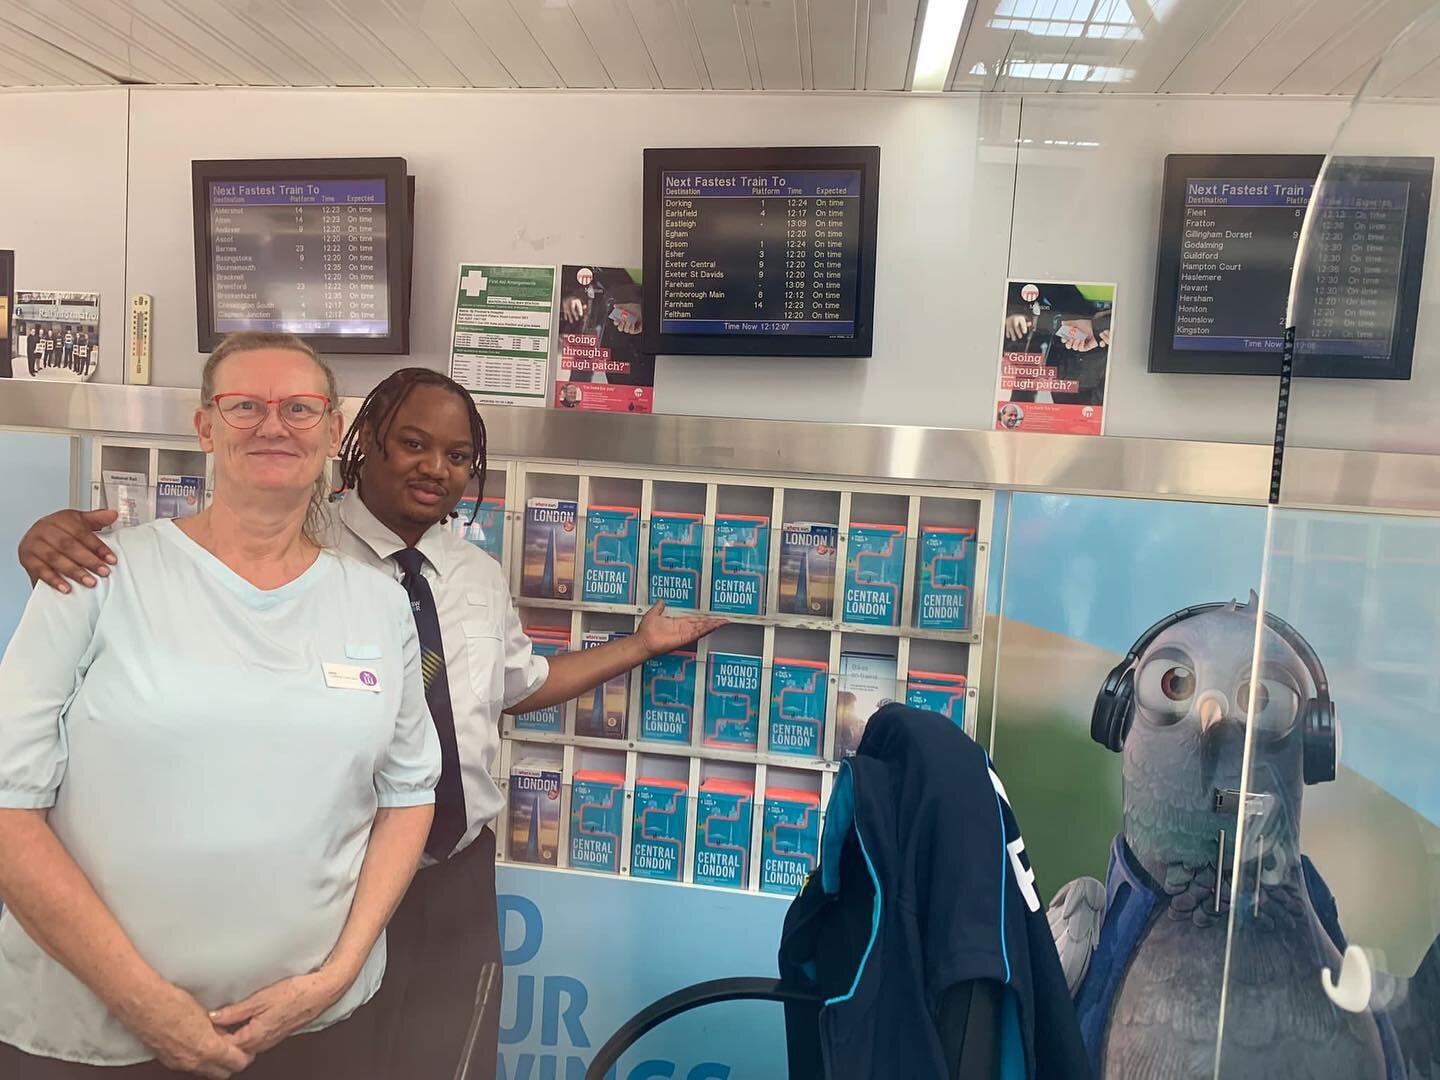 &quot;Everyone loves these maps. Keep them coming!&quot; 

Meet Kaelen and Jane from Waterloo Station 🚅  They've been helping to hand out our Central London Footways maps at the Waterloo Station information centre. We love to see it! 

If you're in 